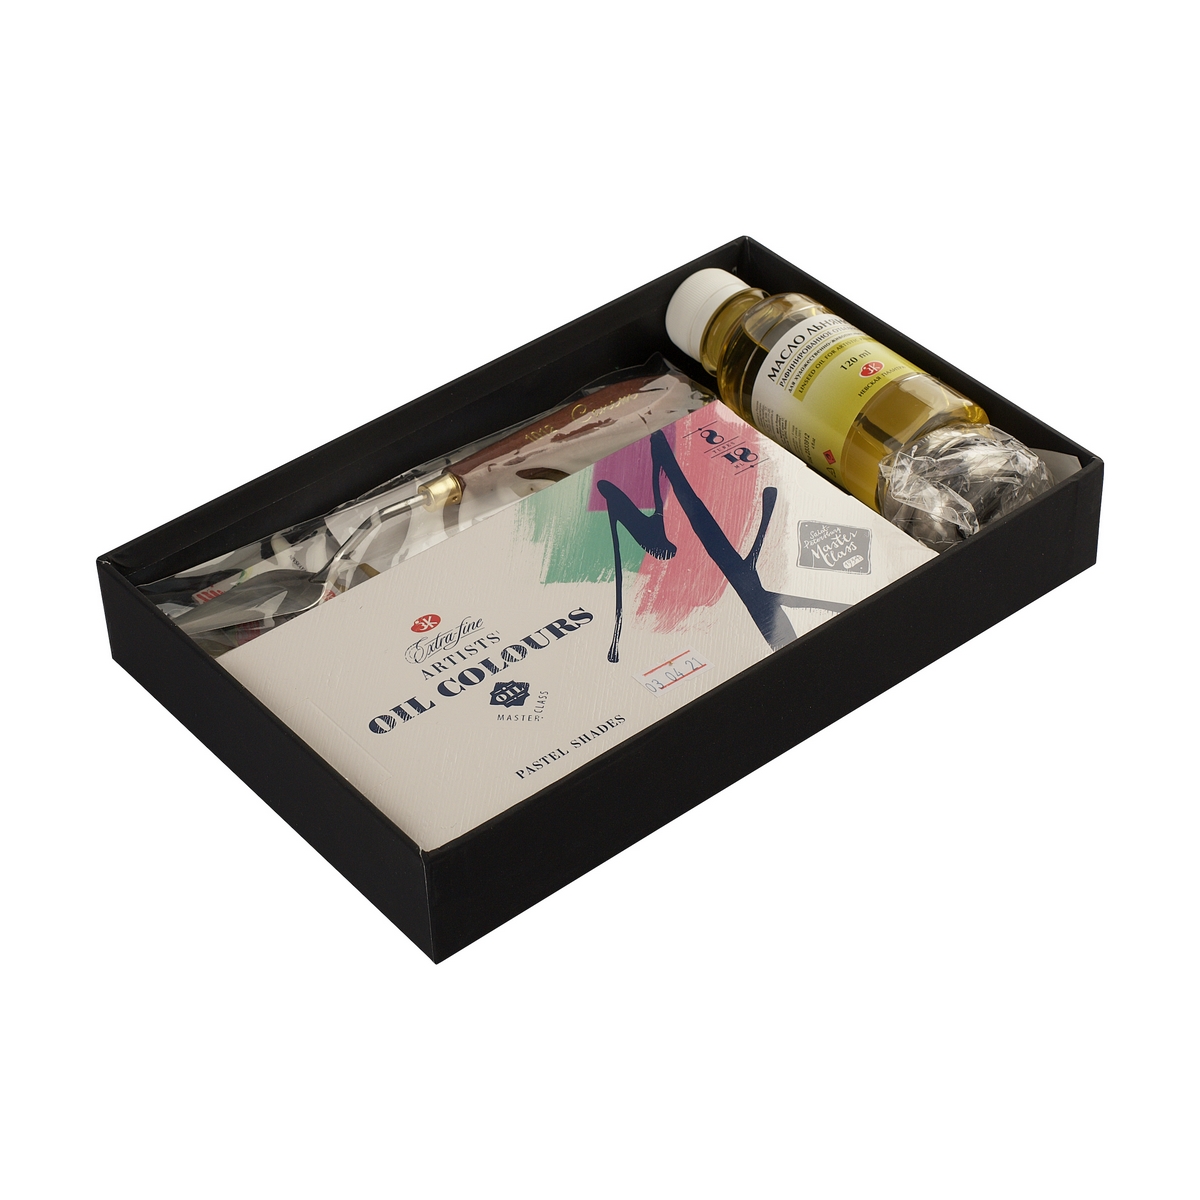 Oil paints gift set Master-Class Pastel shades 8 colours in 18 ml tubes, single dipper with cover , bleached refined linseed-oil , palette knife , canvas panels , brushes, cardboard box